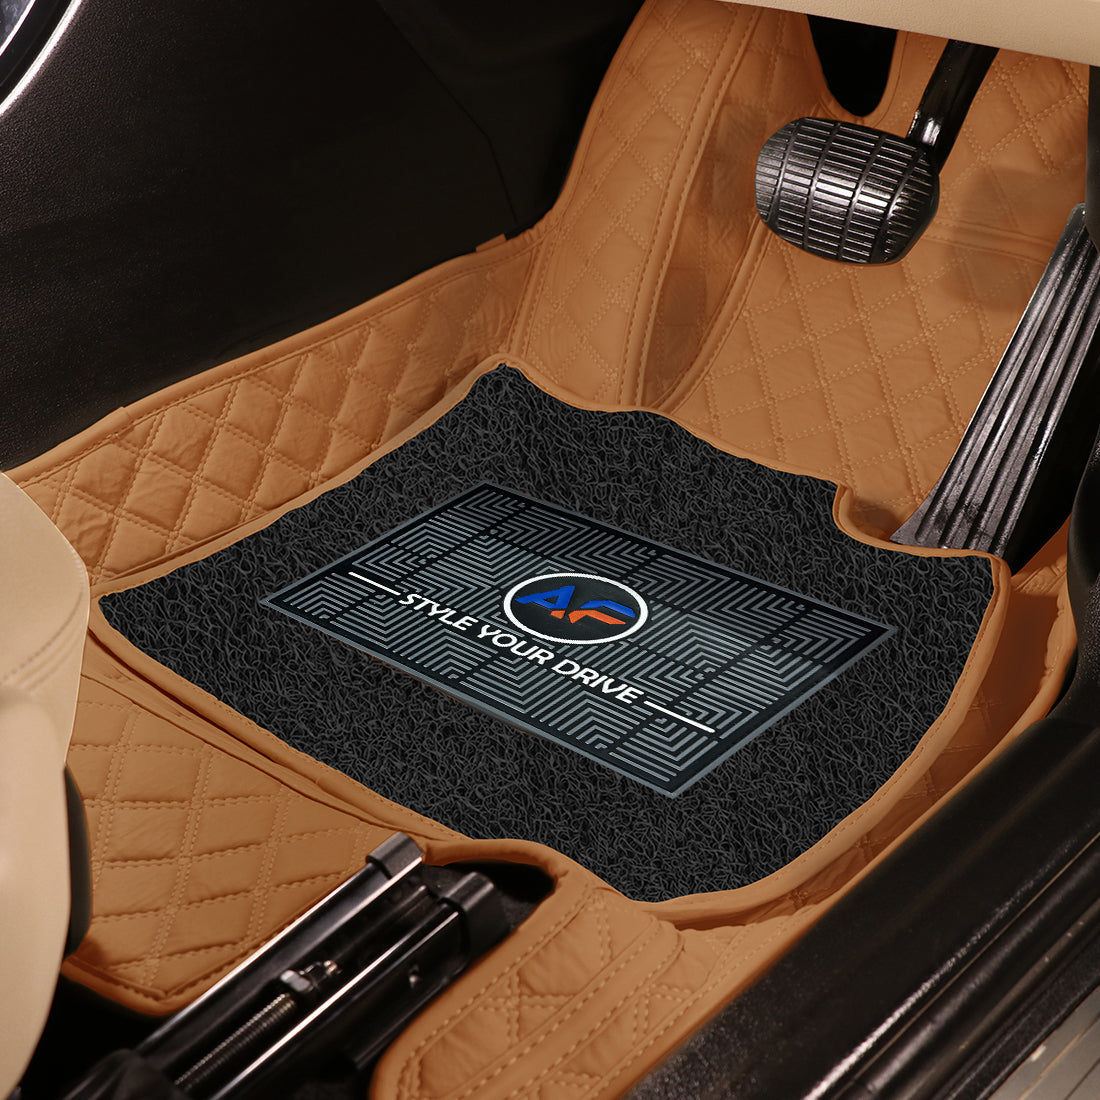 Mercedes S500 5 Seater 2015-7D Luxury Car Mat, All Weather Proof, Anti-Skid, 100% Waterproof & Odorless with Unique Diamond Fish Design (24mm Luxury PU Leather, 2 Rows)